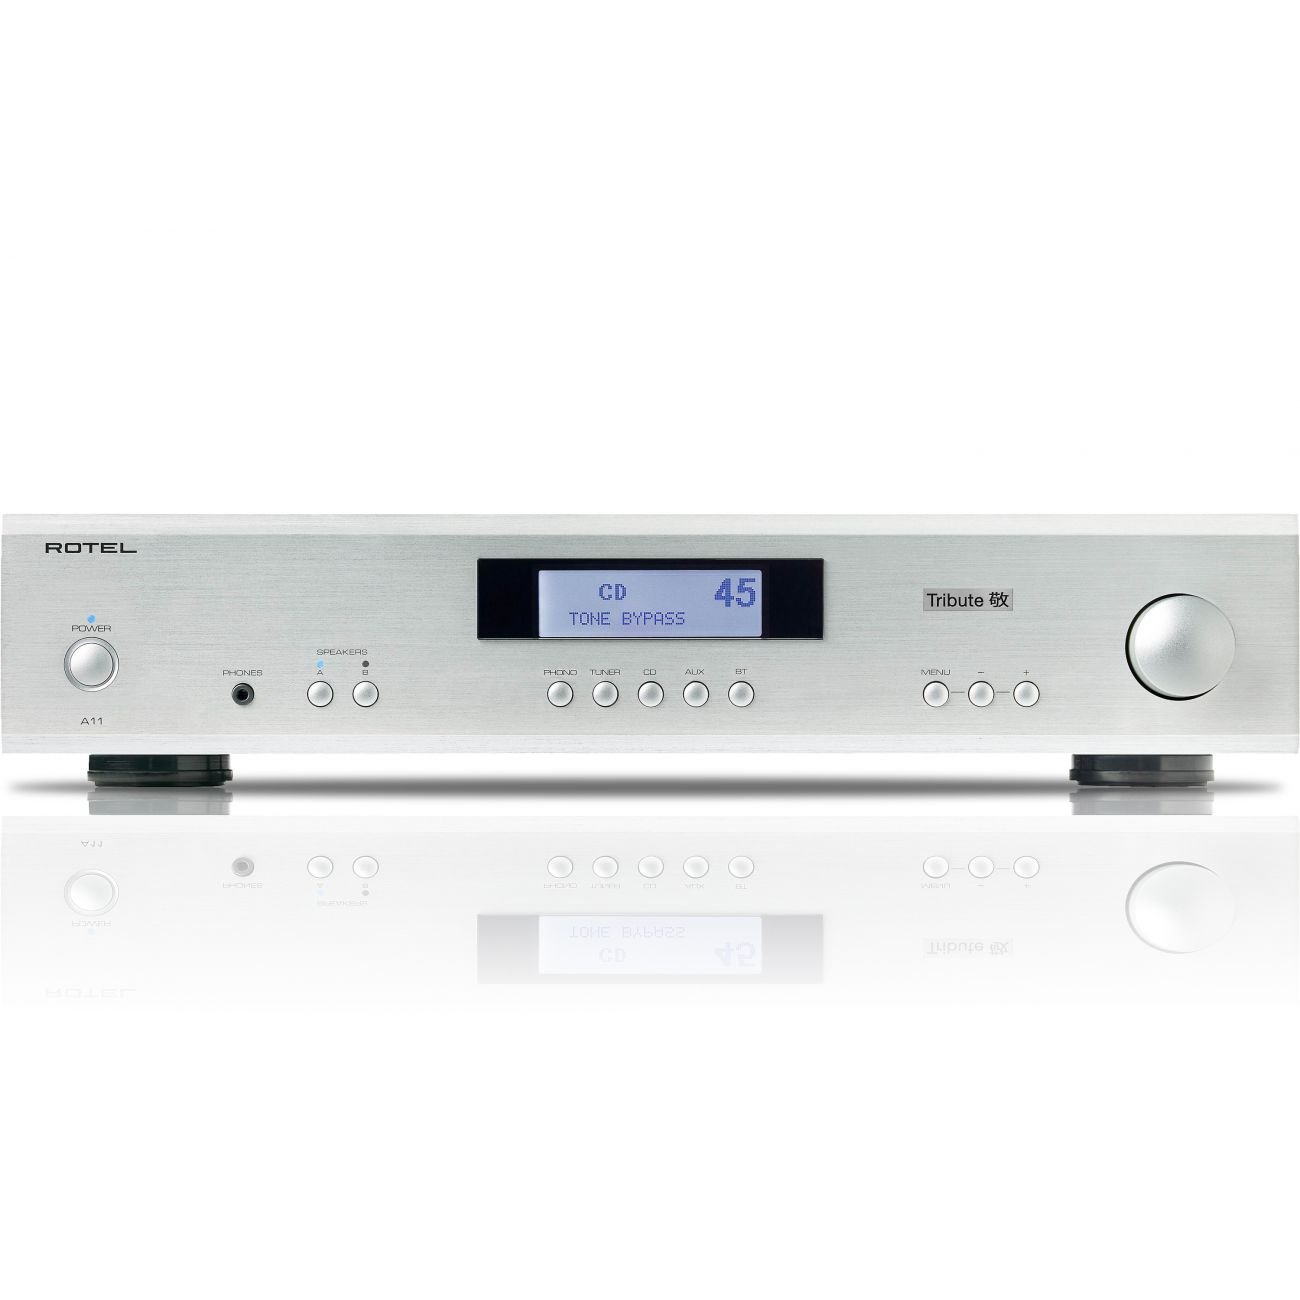 rotel-a11-amplifier-silver-1lsds